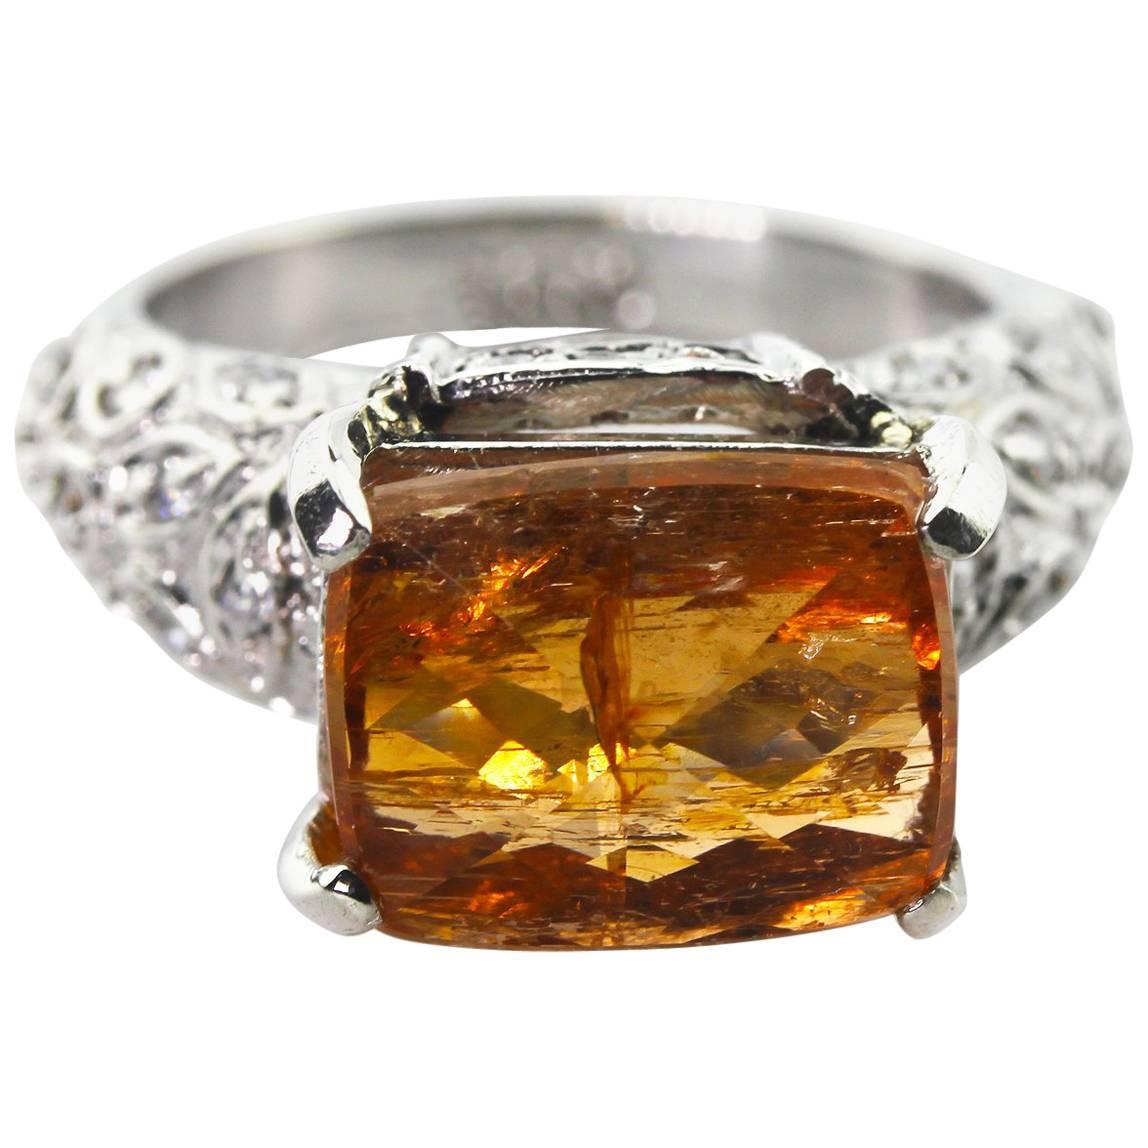 AJD Spectacular RARE 9.47 Ct Imperial Topaz Antique Setting Silver Ring